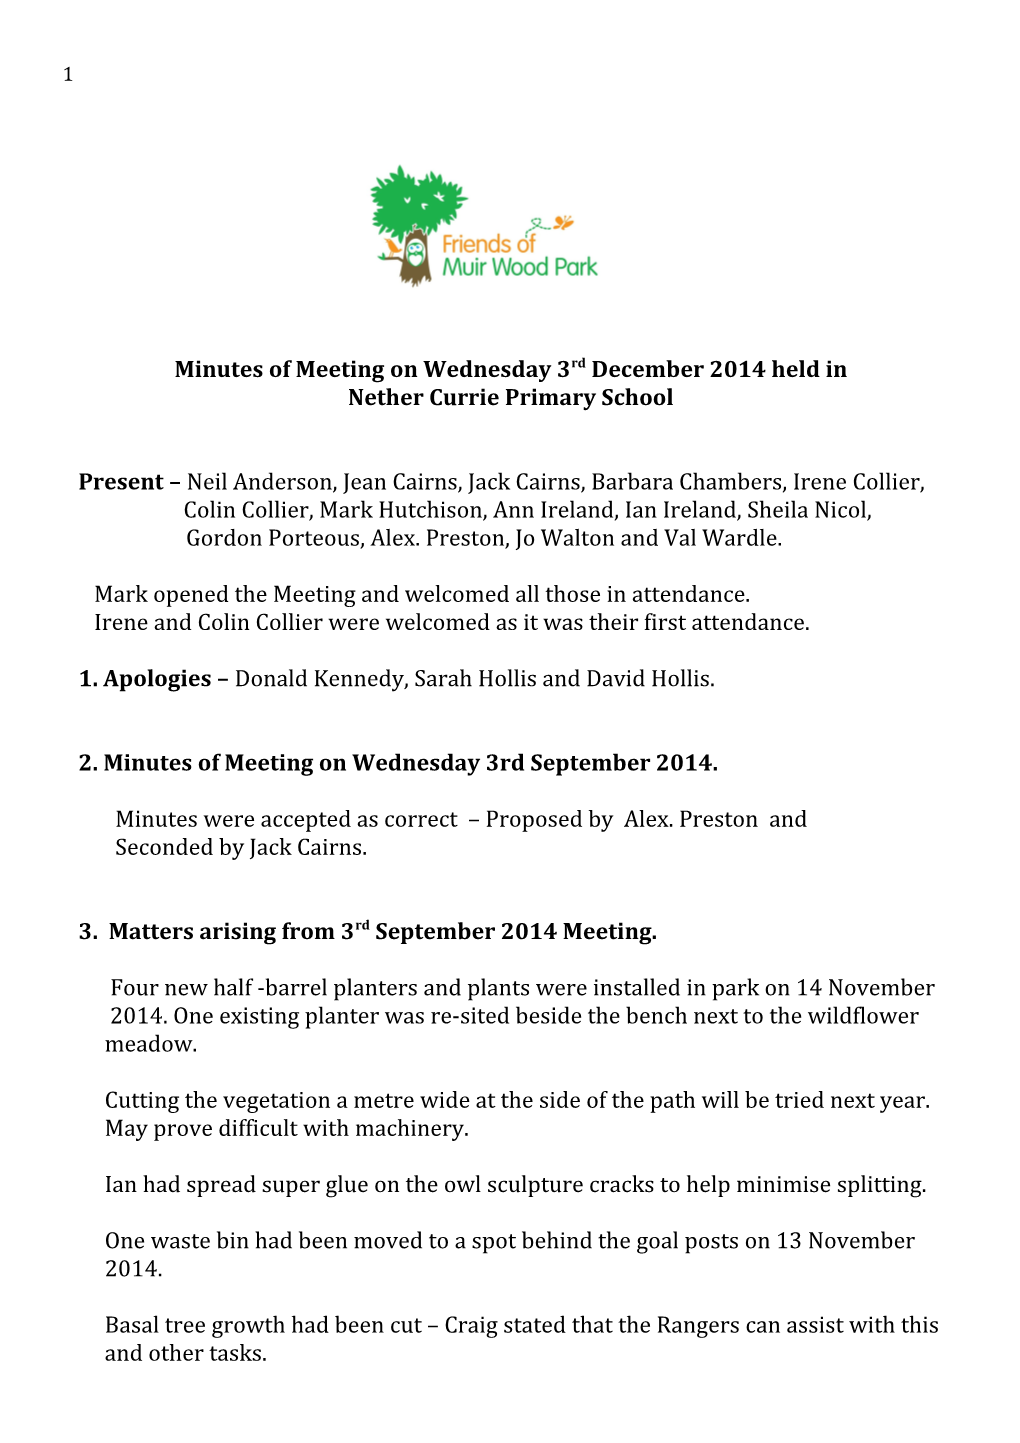 Minutes of Meeting on Wednesday 3Rd December 2014Held In